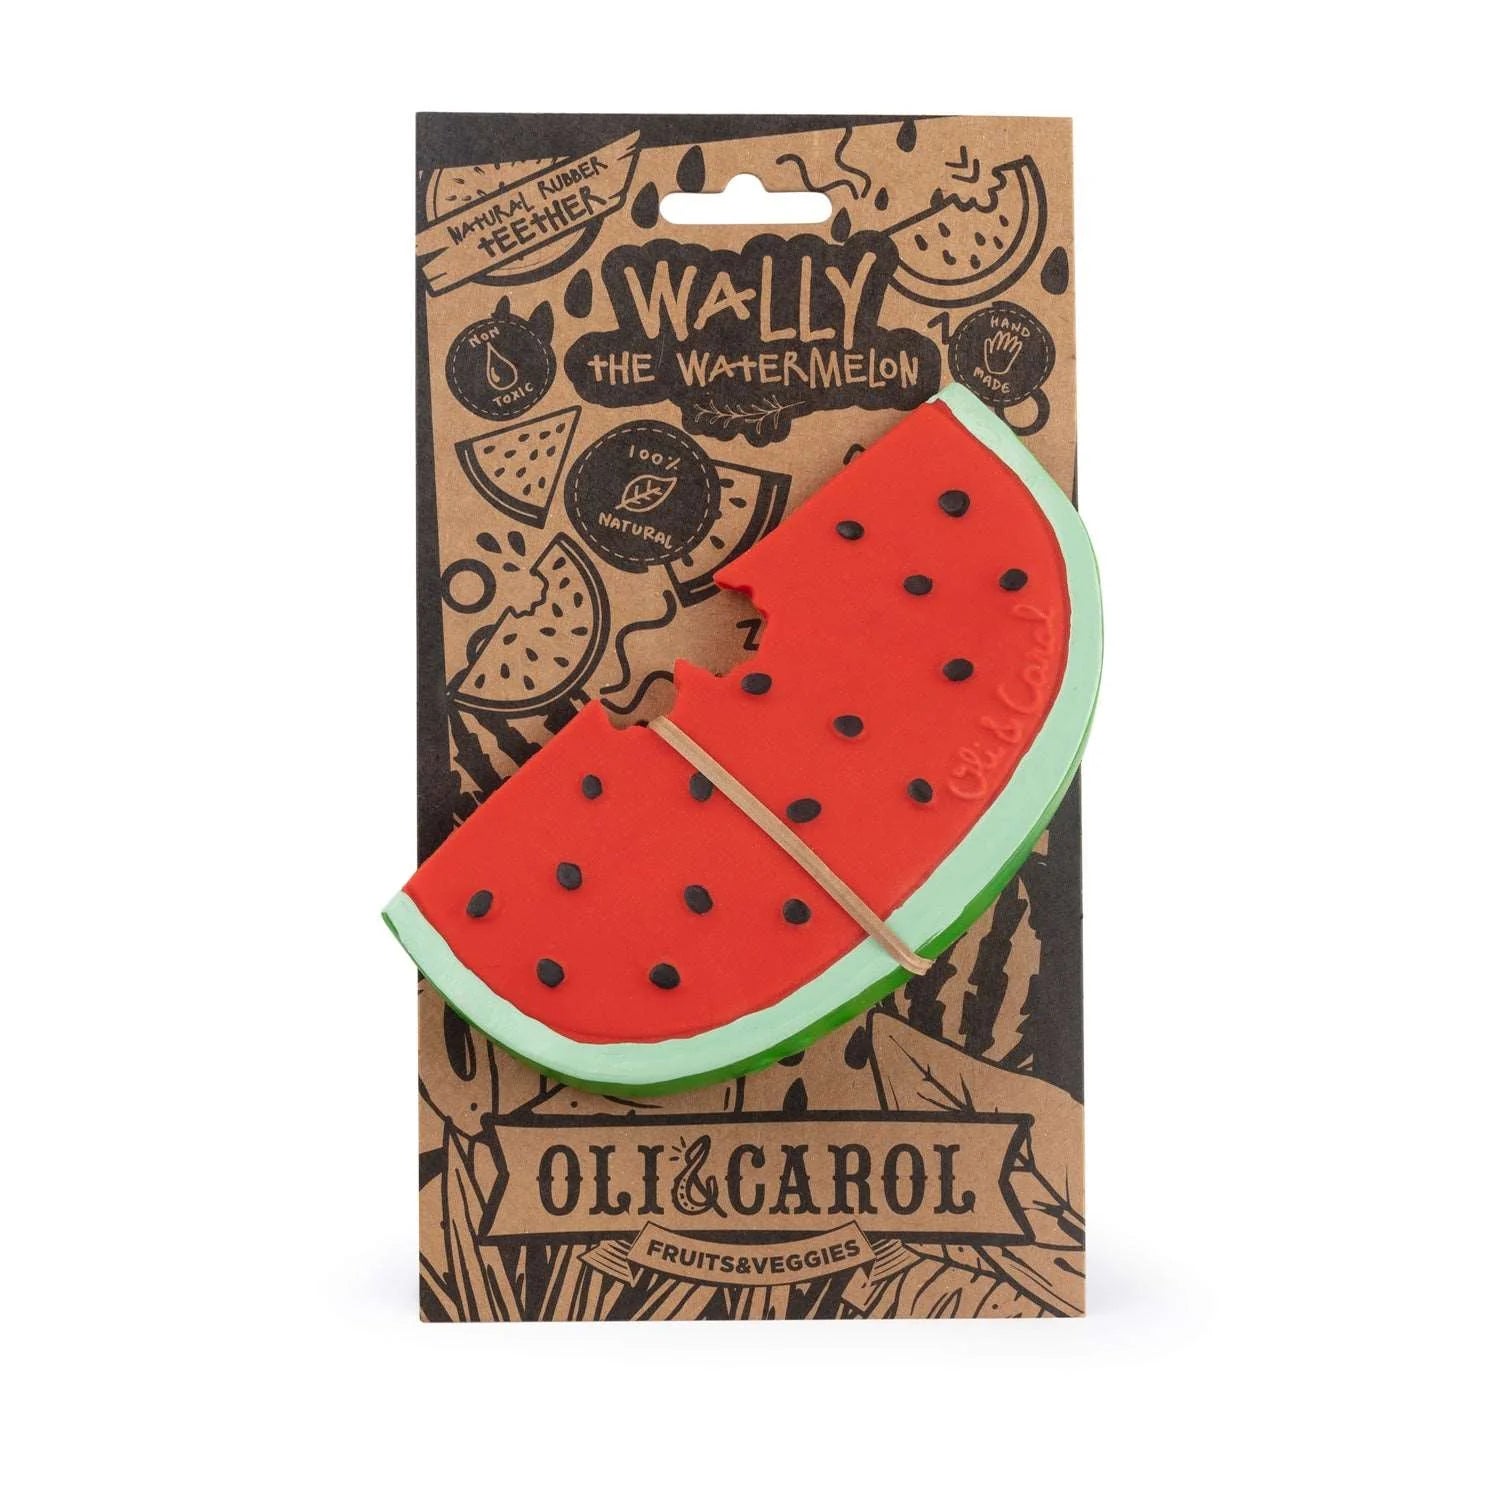 Toys Games and Puzzles Oli & Carol Wally The Watermelon by Weirs of Baggot Street